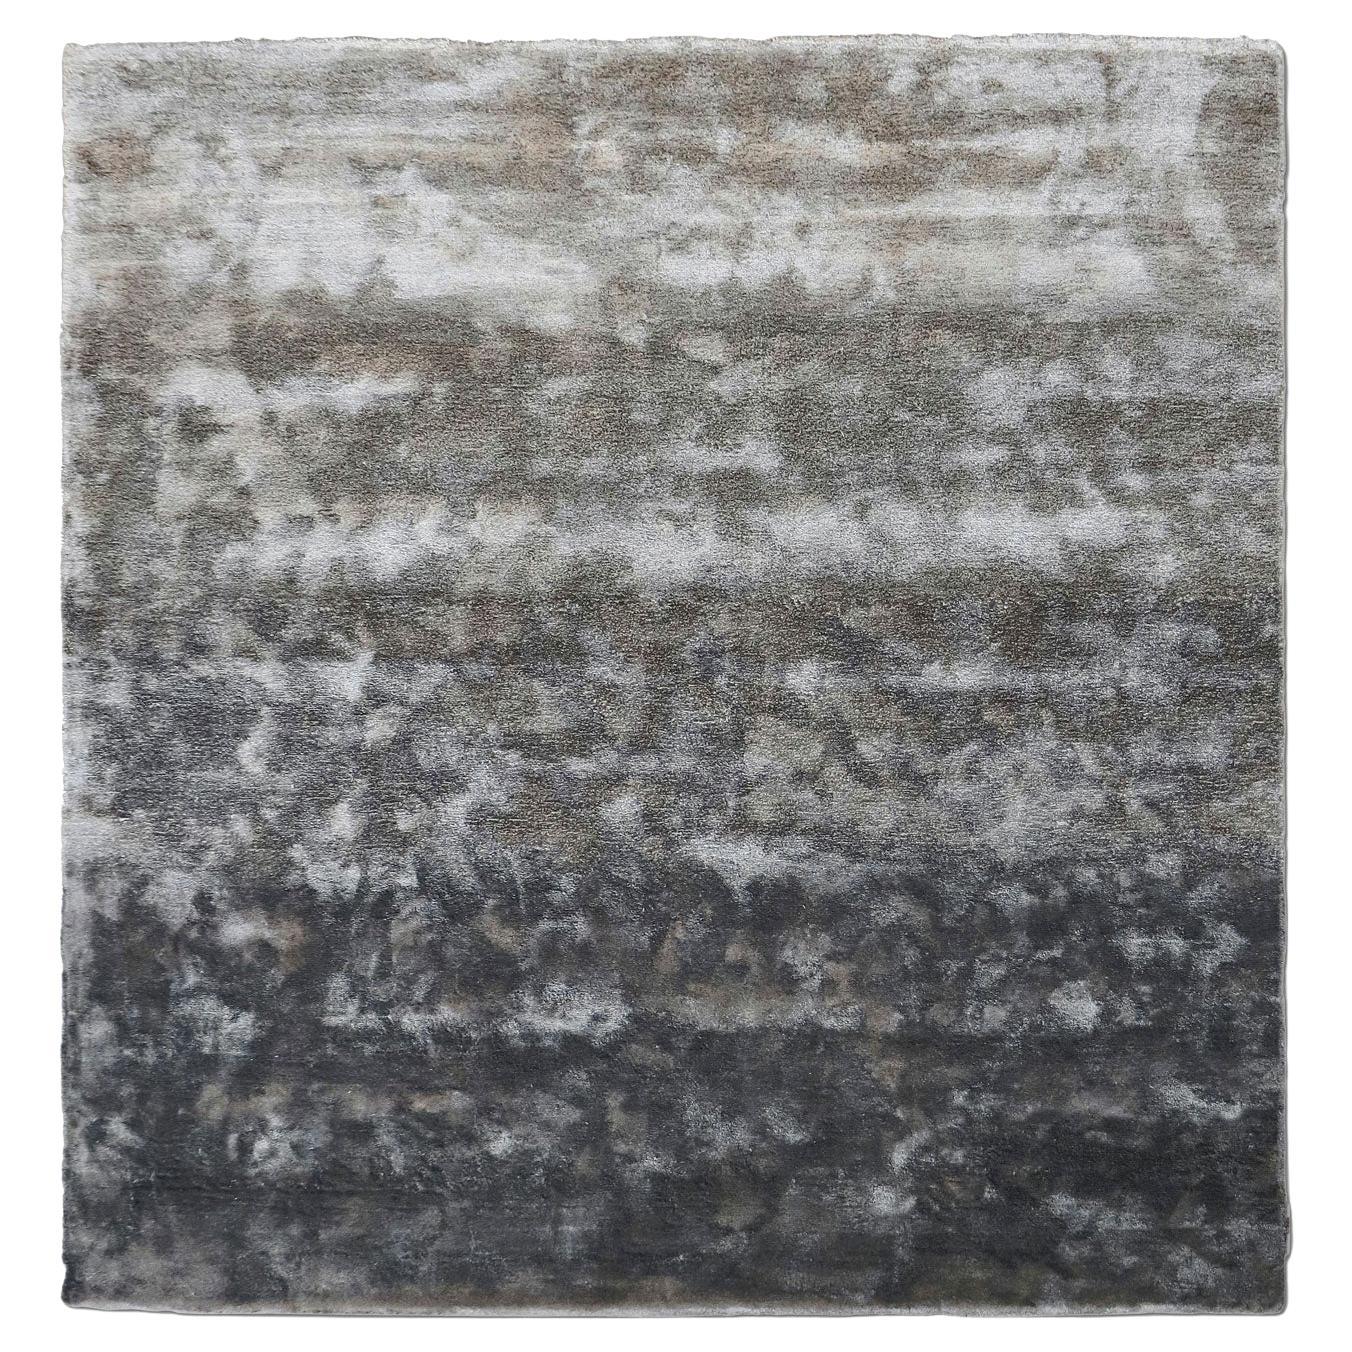 21st Cent Elegant Eco-Friendly Grey Rug by Deanna Comellini 250x260 cm For Sale